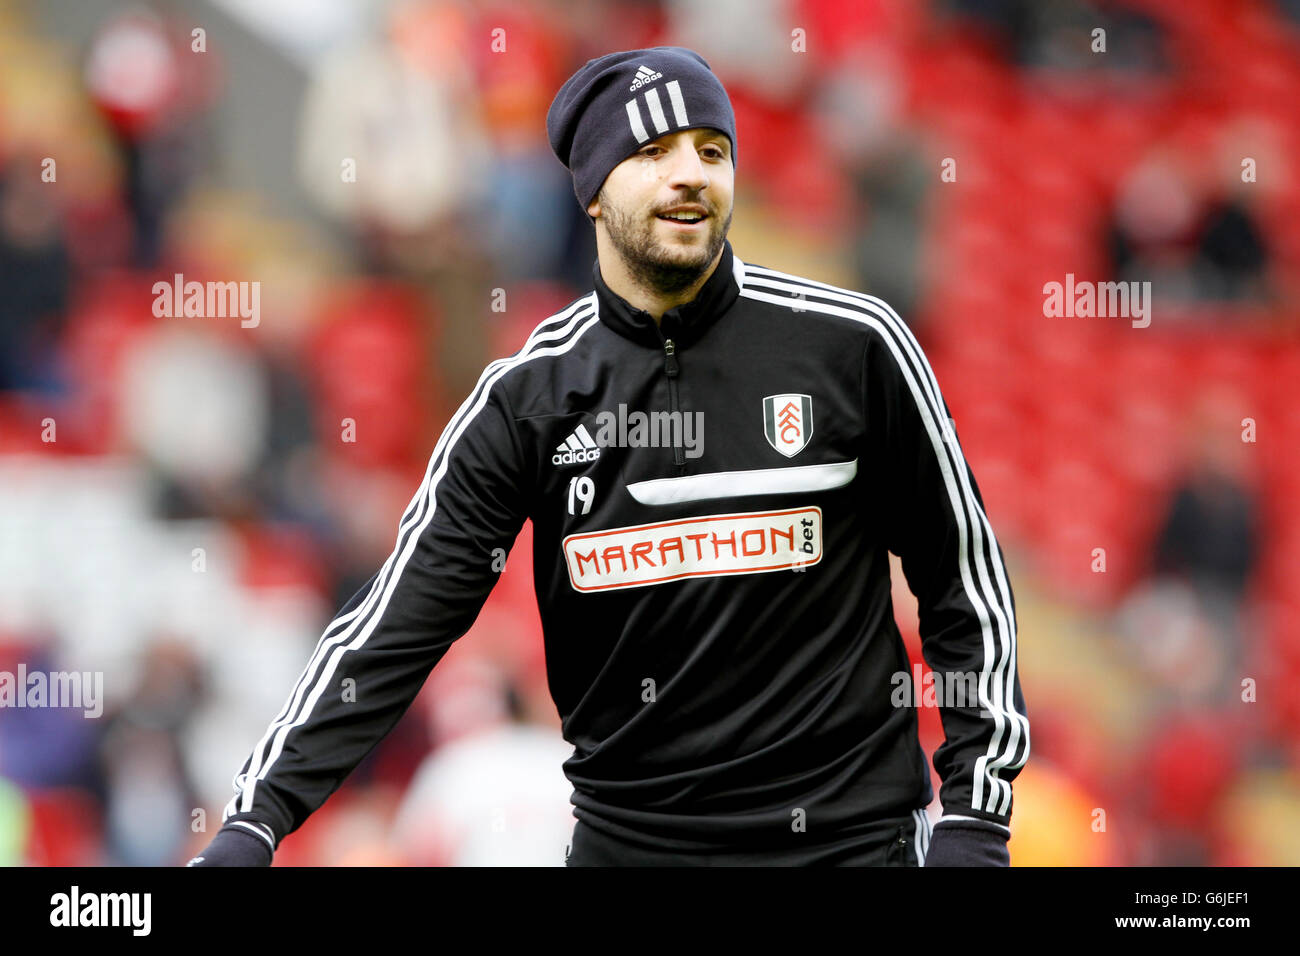 Football - Barclays Premier League - Liverpool / Fulham - Anfield. Adel Taarabt, Fulham Banque D'Images